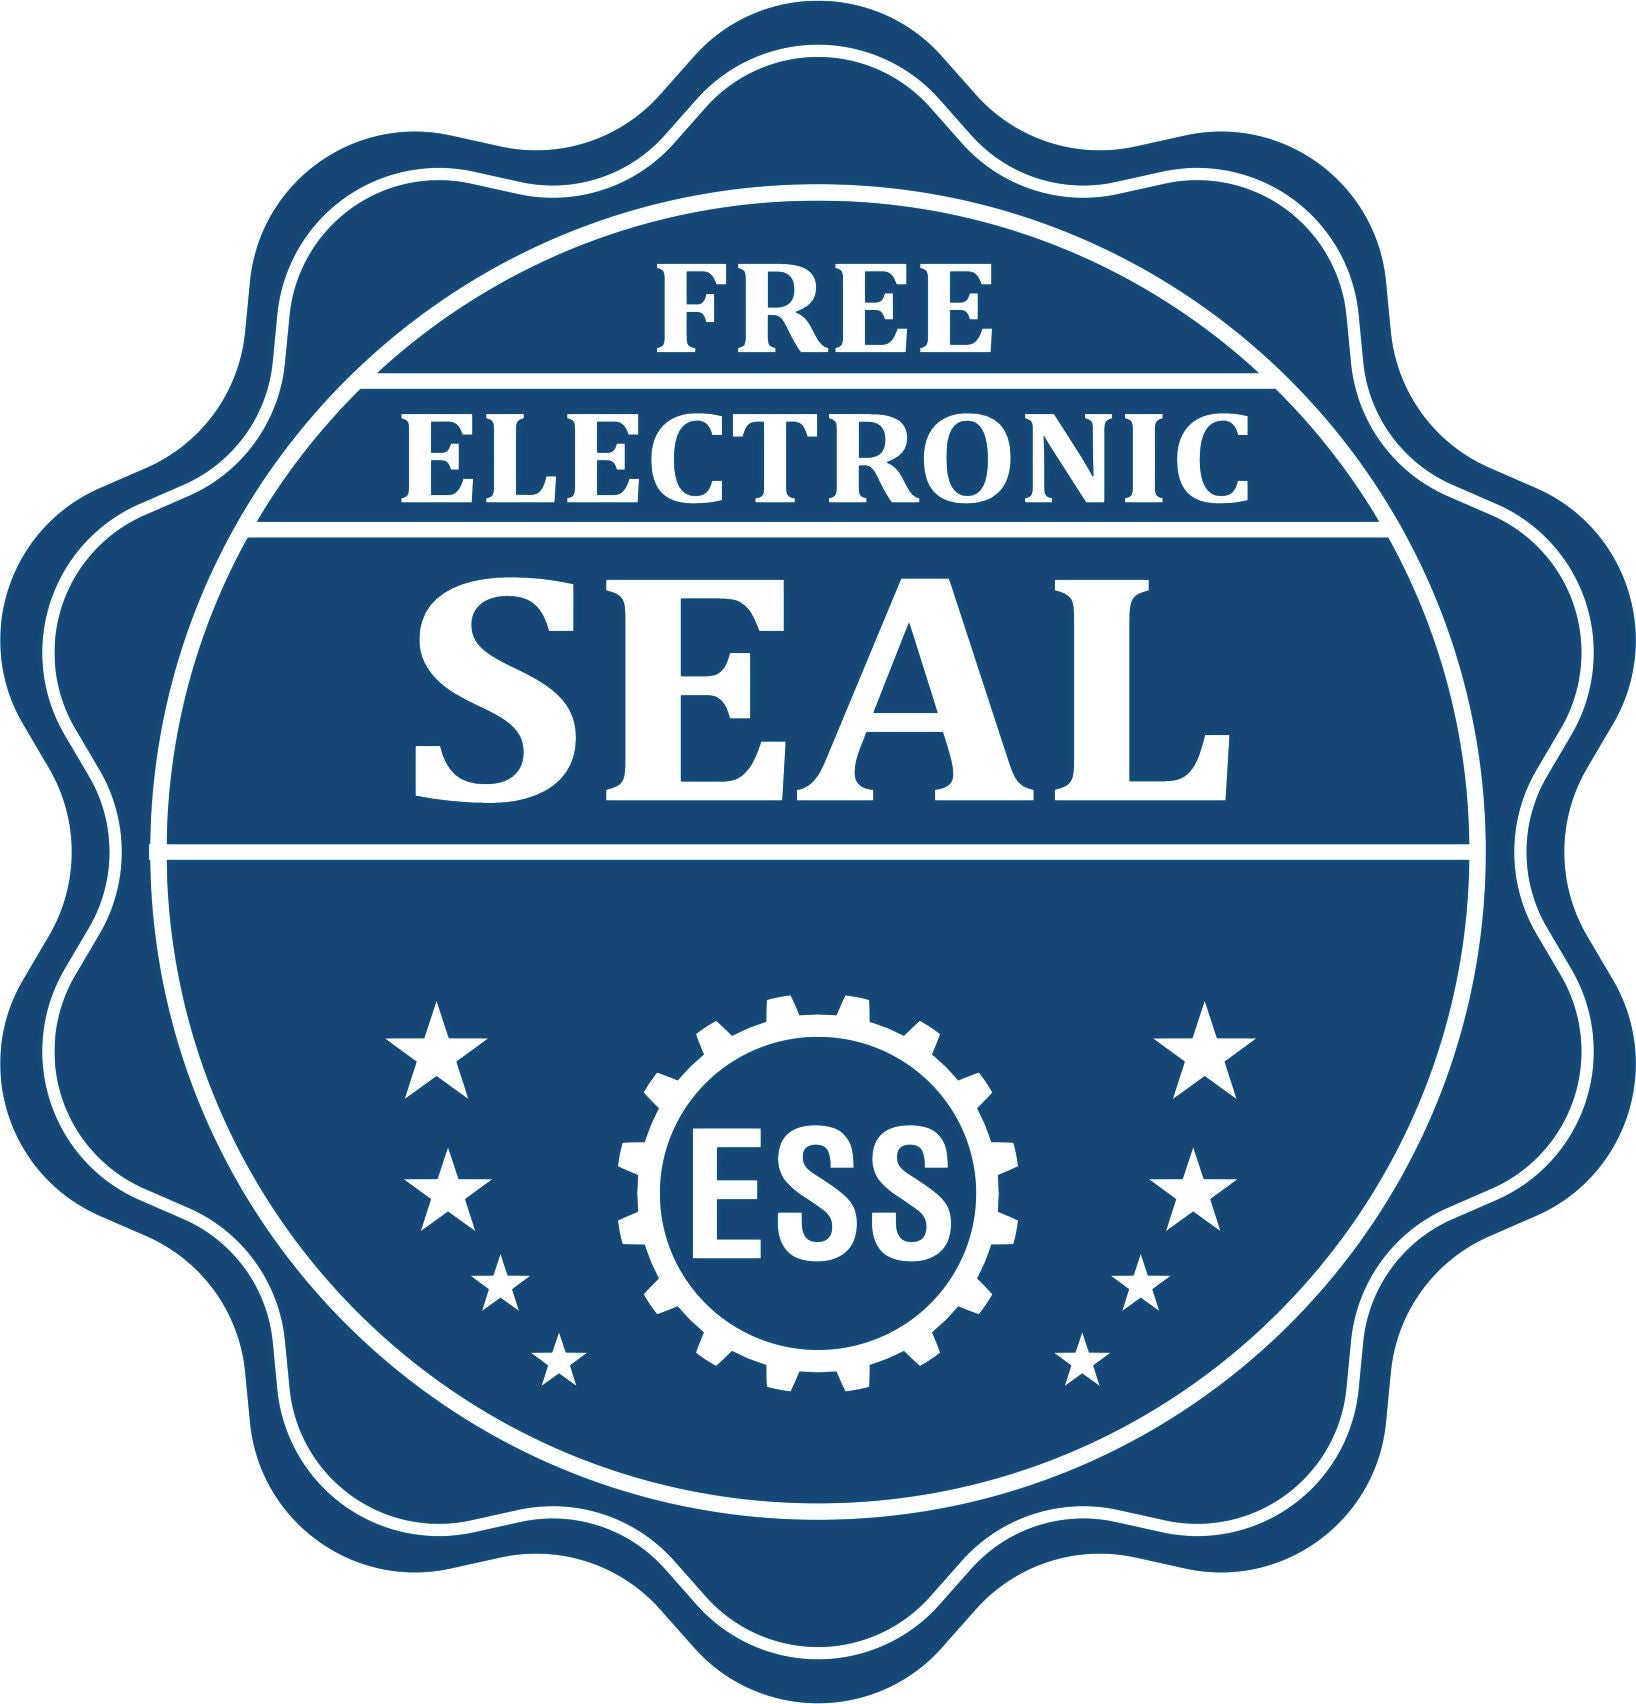 A badge showing a free electronic seal for the Hybrid Nevada Geologist Seal with stars and the ESS gear on the emblem.